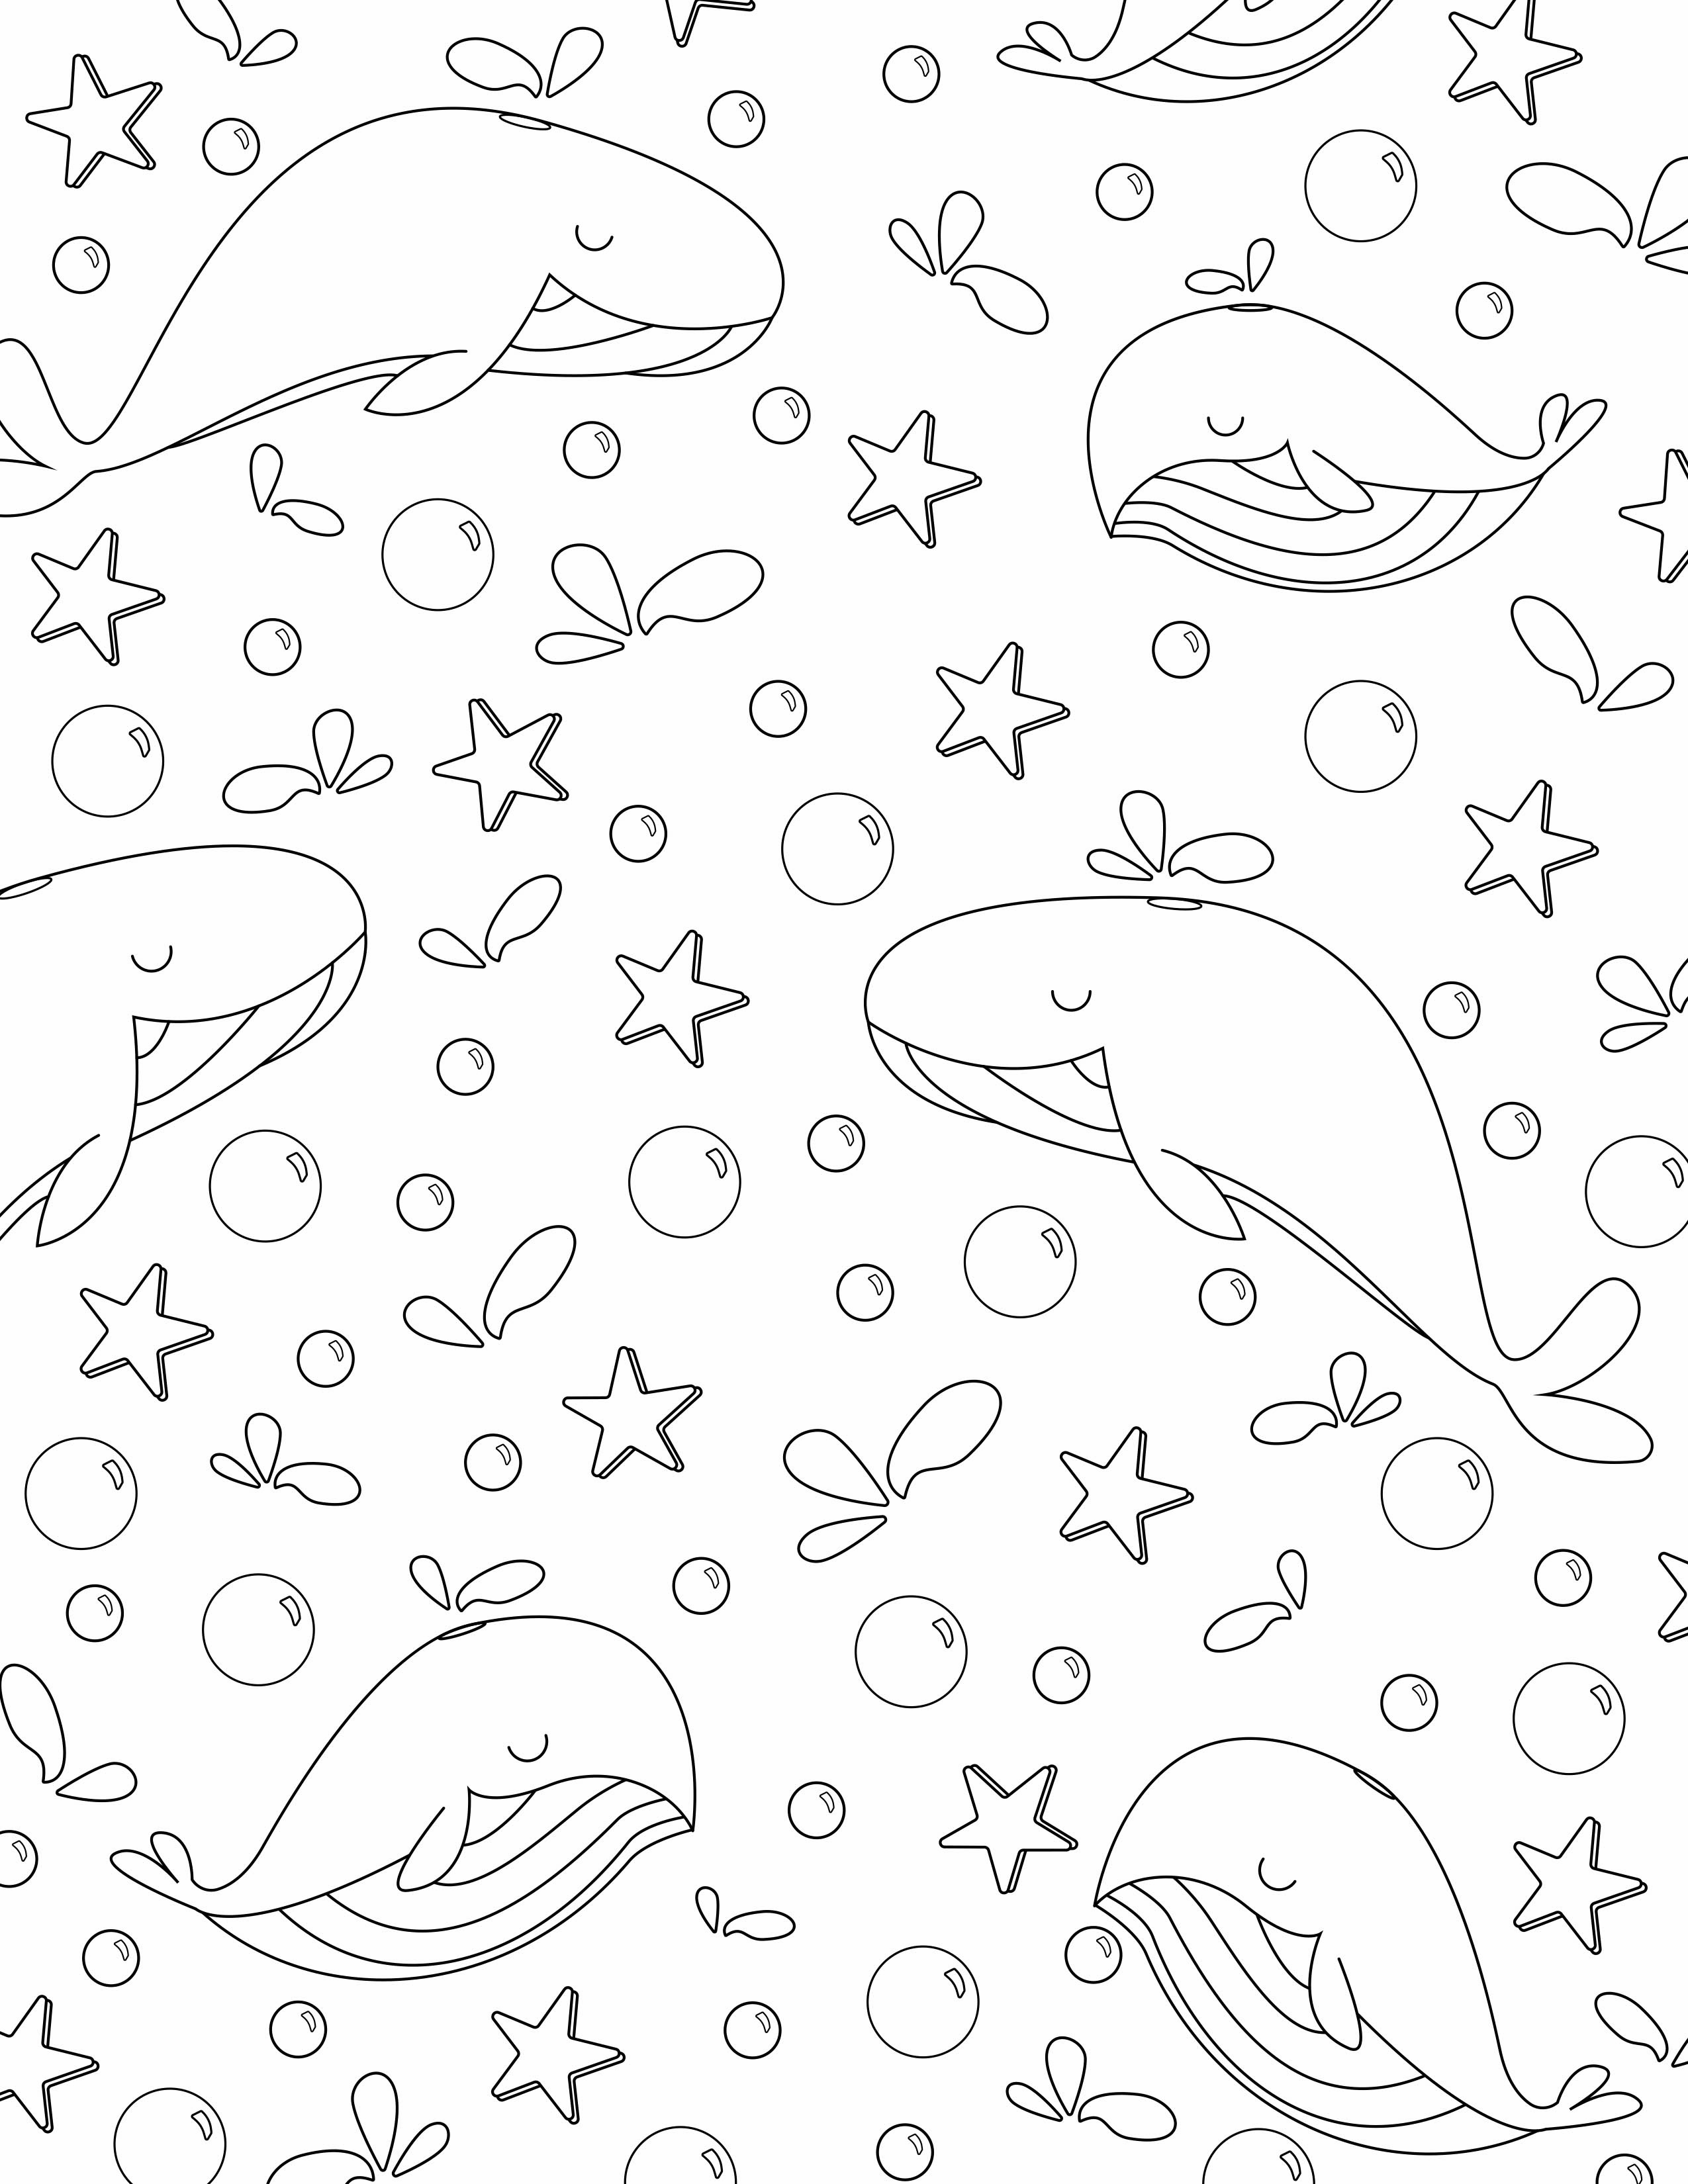 Whale Coloring page 